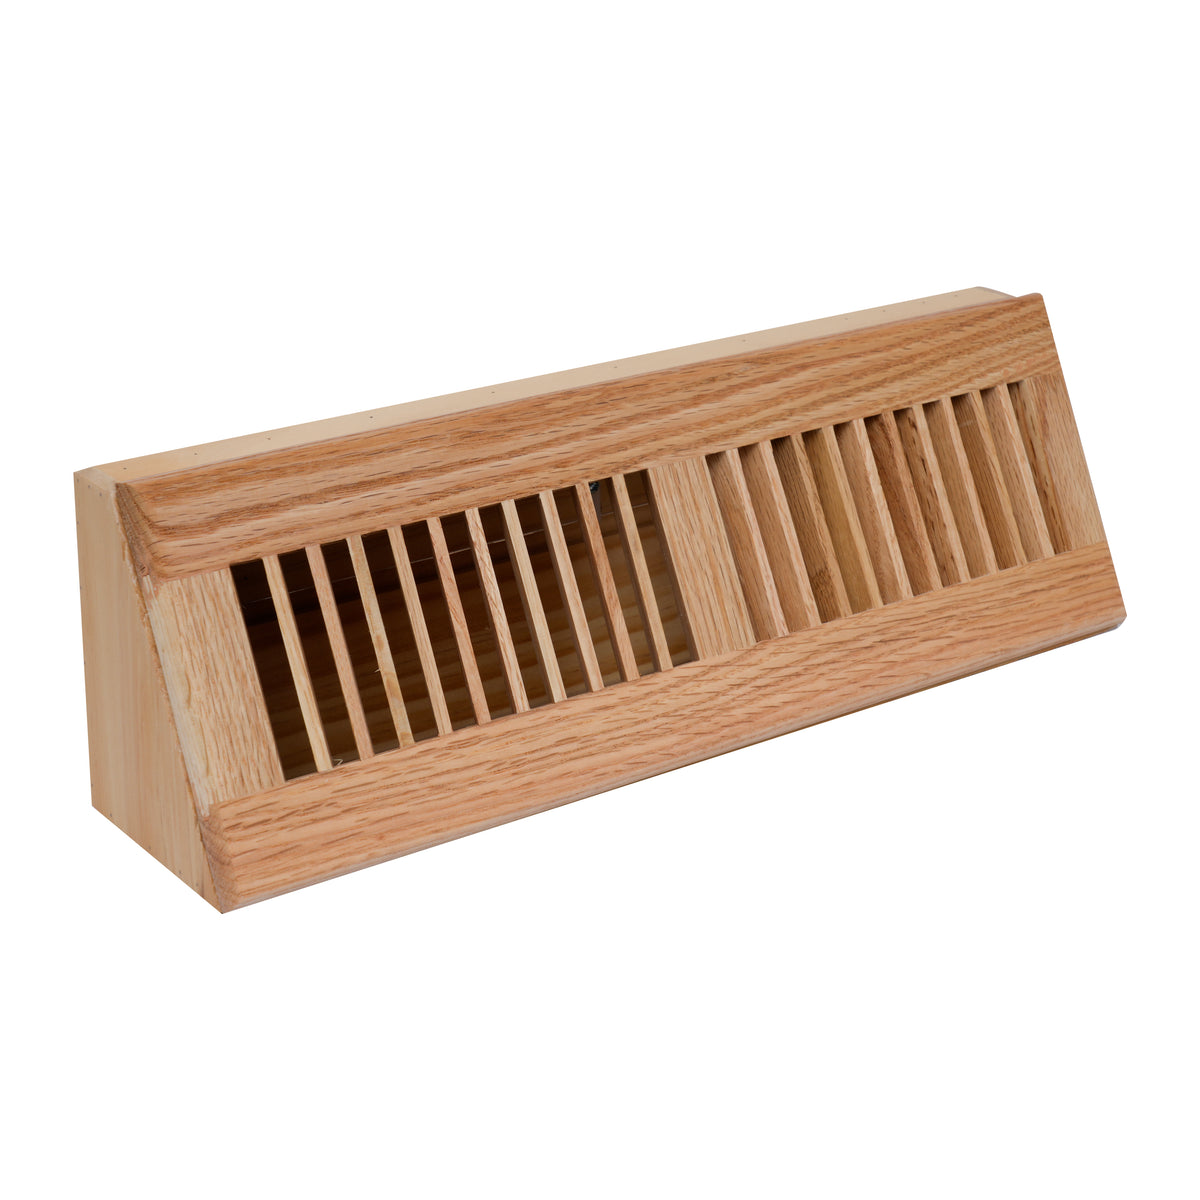 15" Wooden Baseboard Floor Register | Return Air Grille | Decorative Air Supply Vent Cover | Pre-Finished Natural Red Oak Wood Air Diffuser